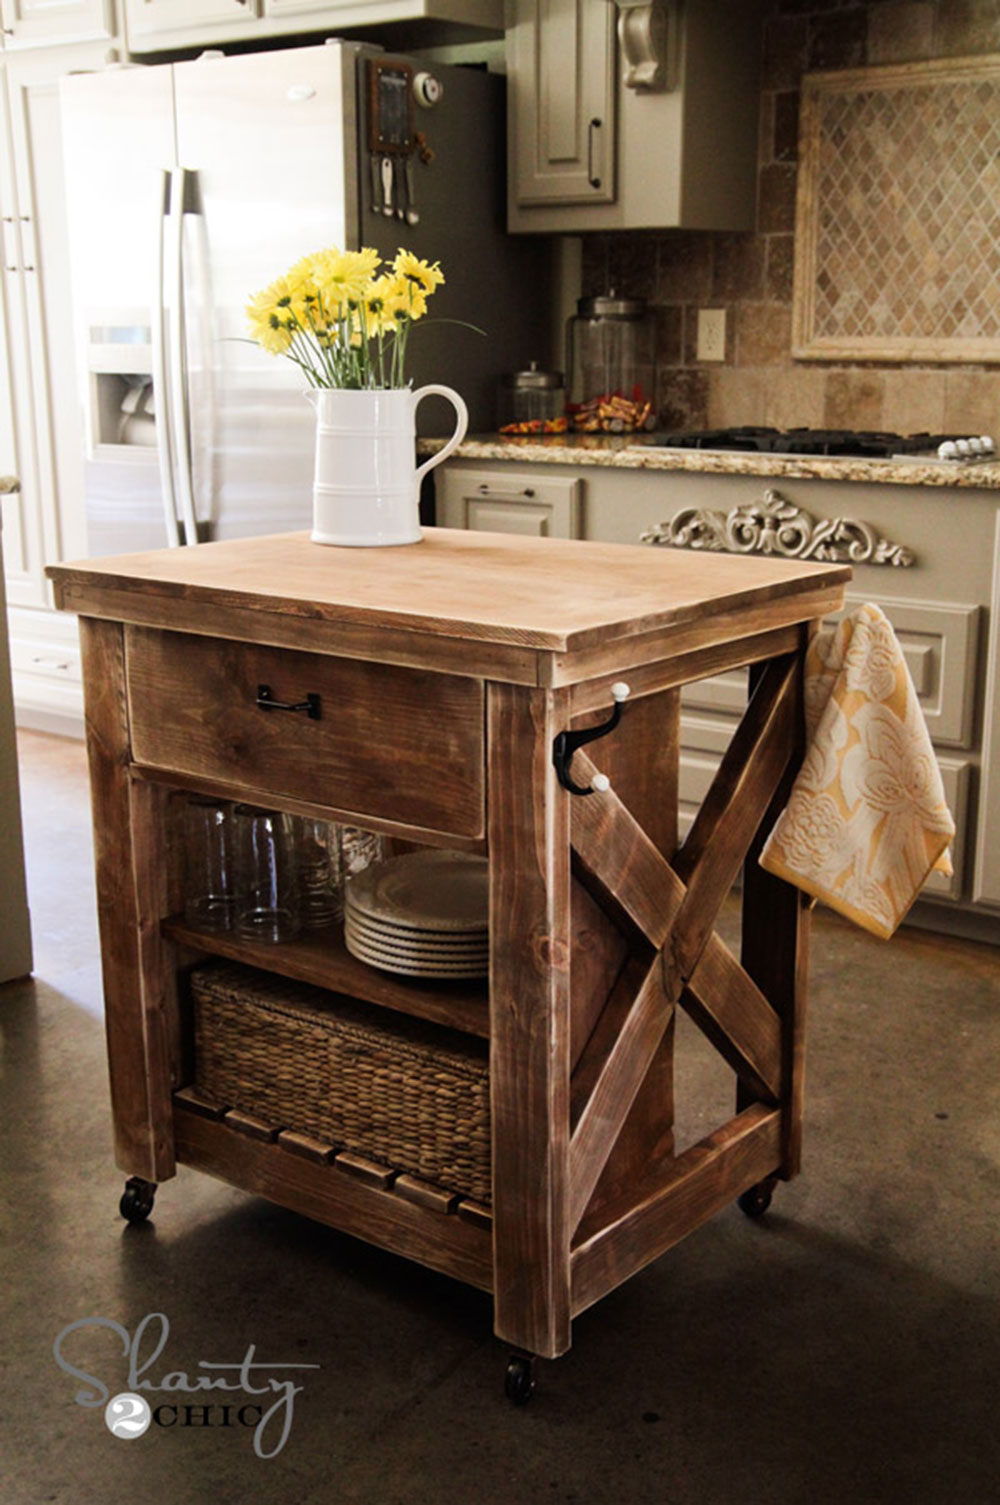 Money-free-DIY-Kitchen-Island How to build a kitchen island (17 DIY kitchen island plans)